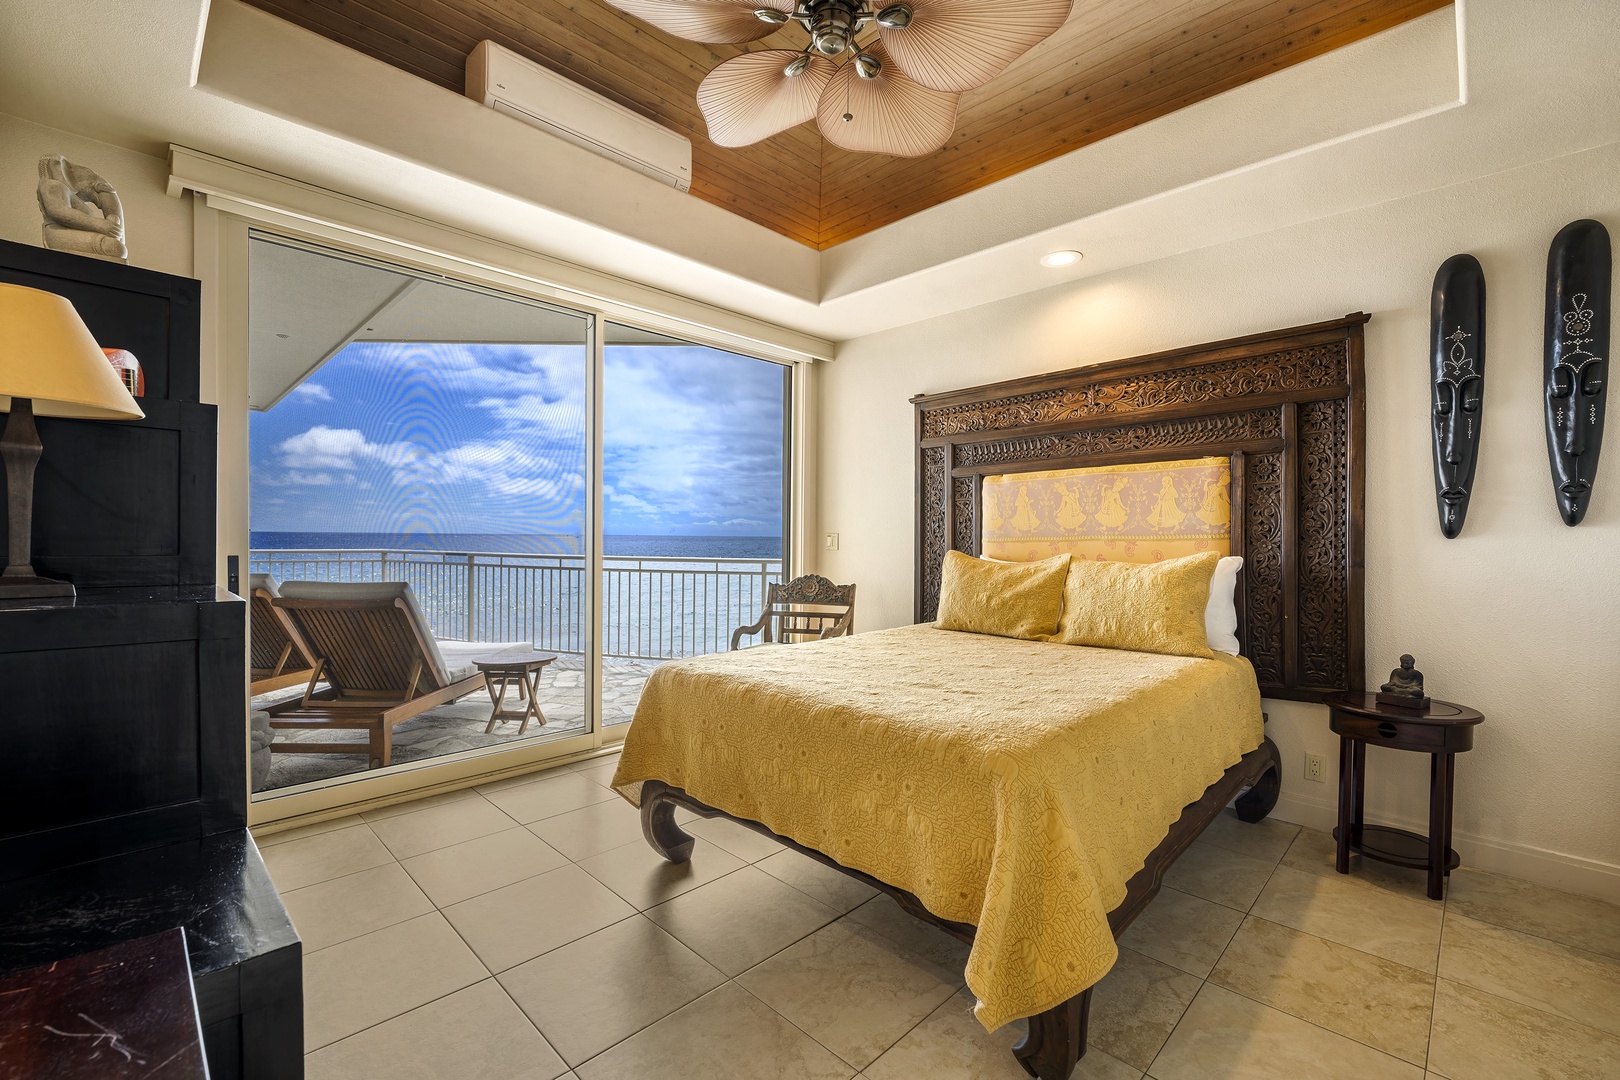 Kailua Kona Vacation Rentals, Ali'i Point #12 - Guest bedroom equipped with King bed & A/C